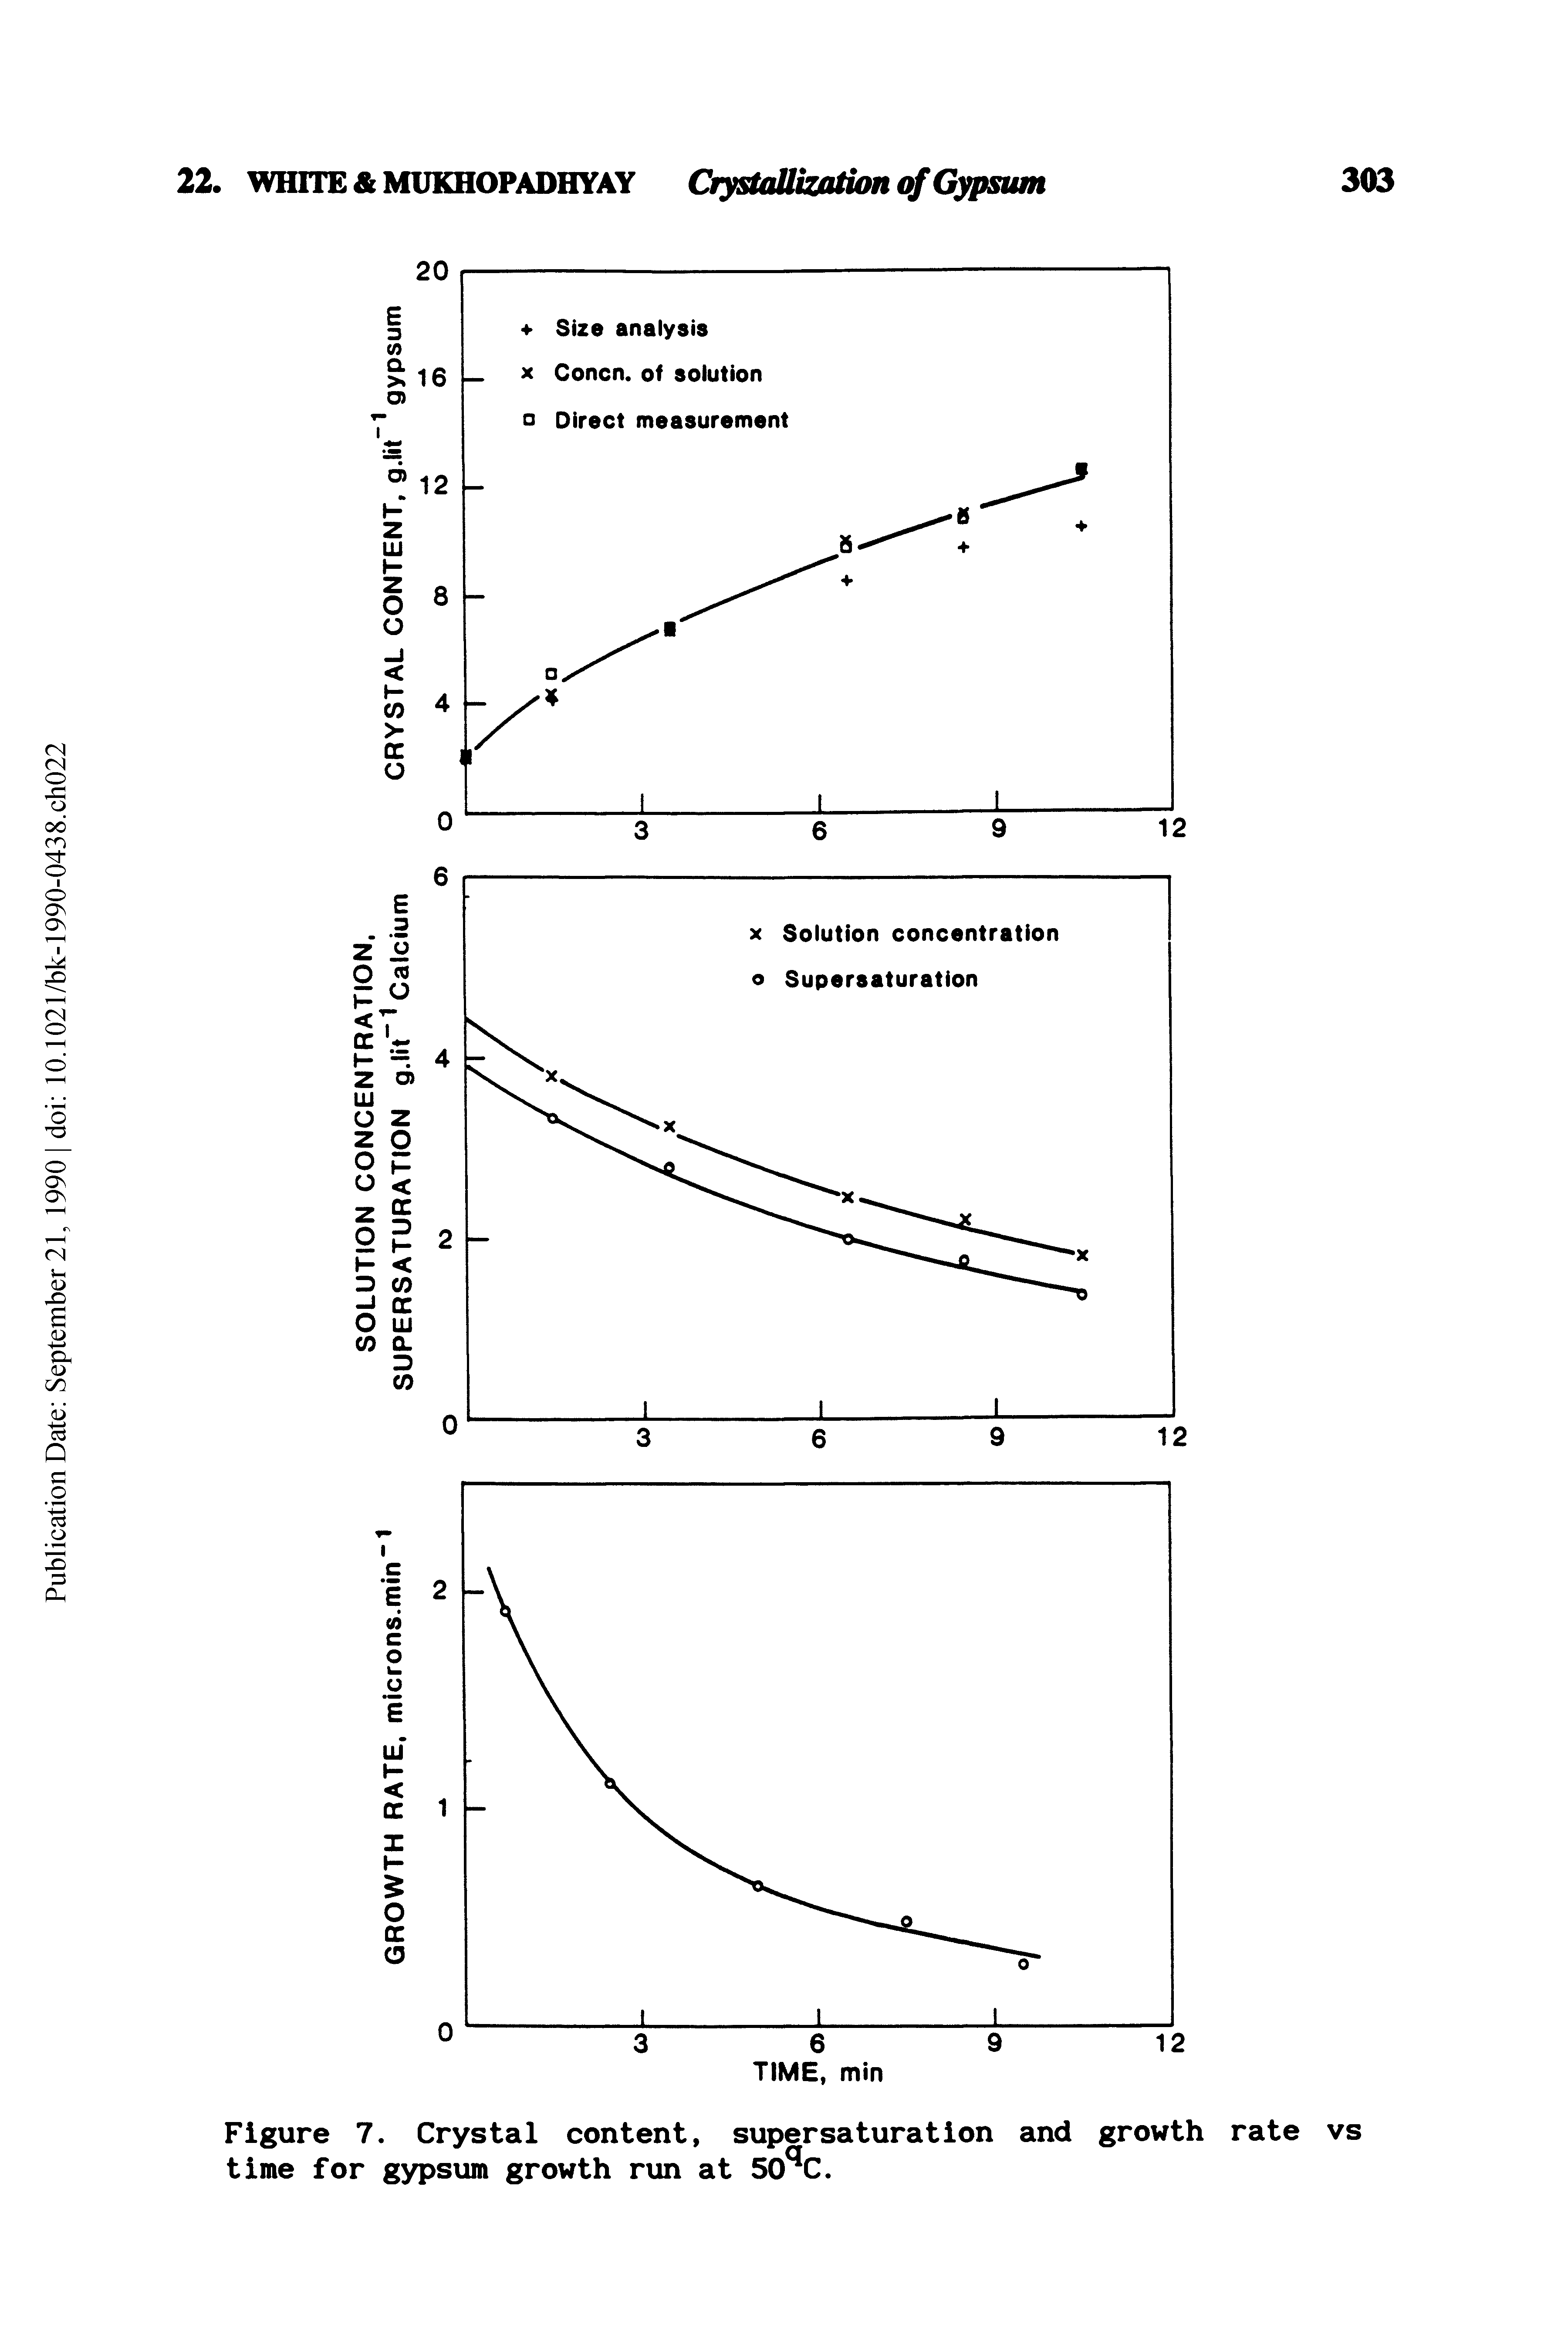 Figure 7. Crystal content, supersaturation and growth rate vs time for gypsum growth run at 50 C.